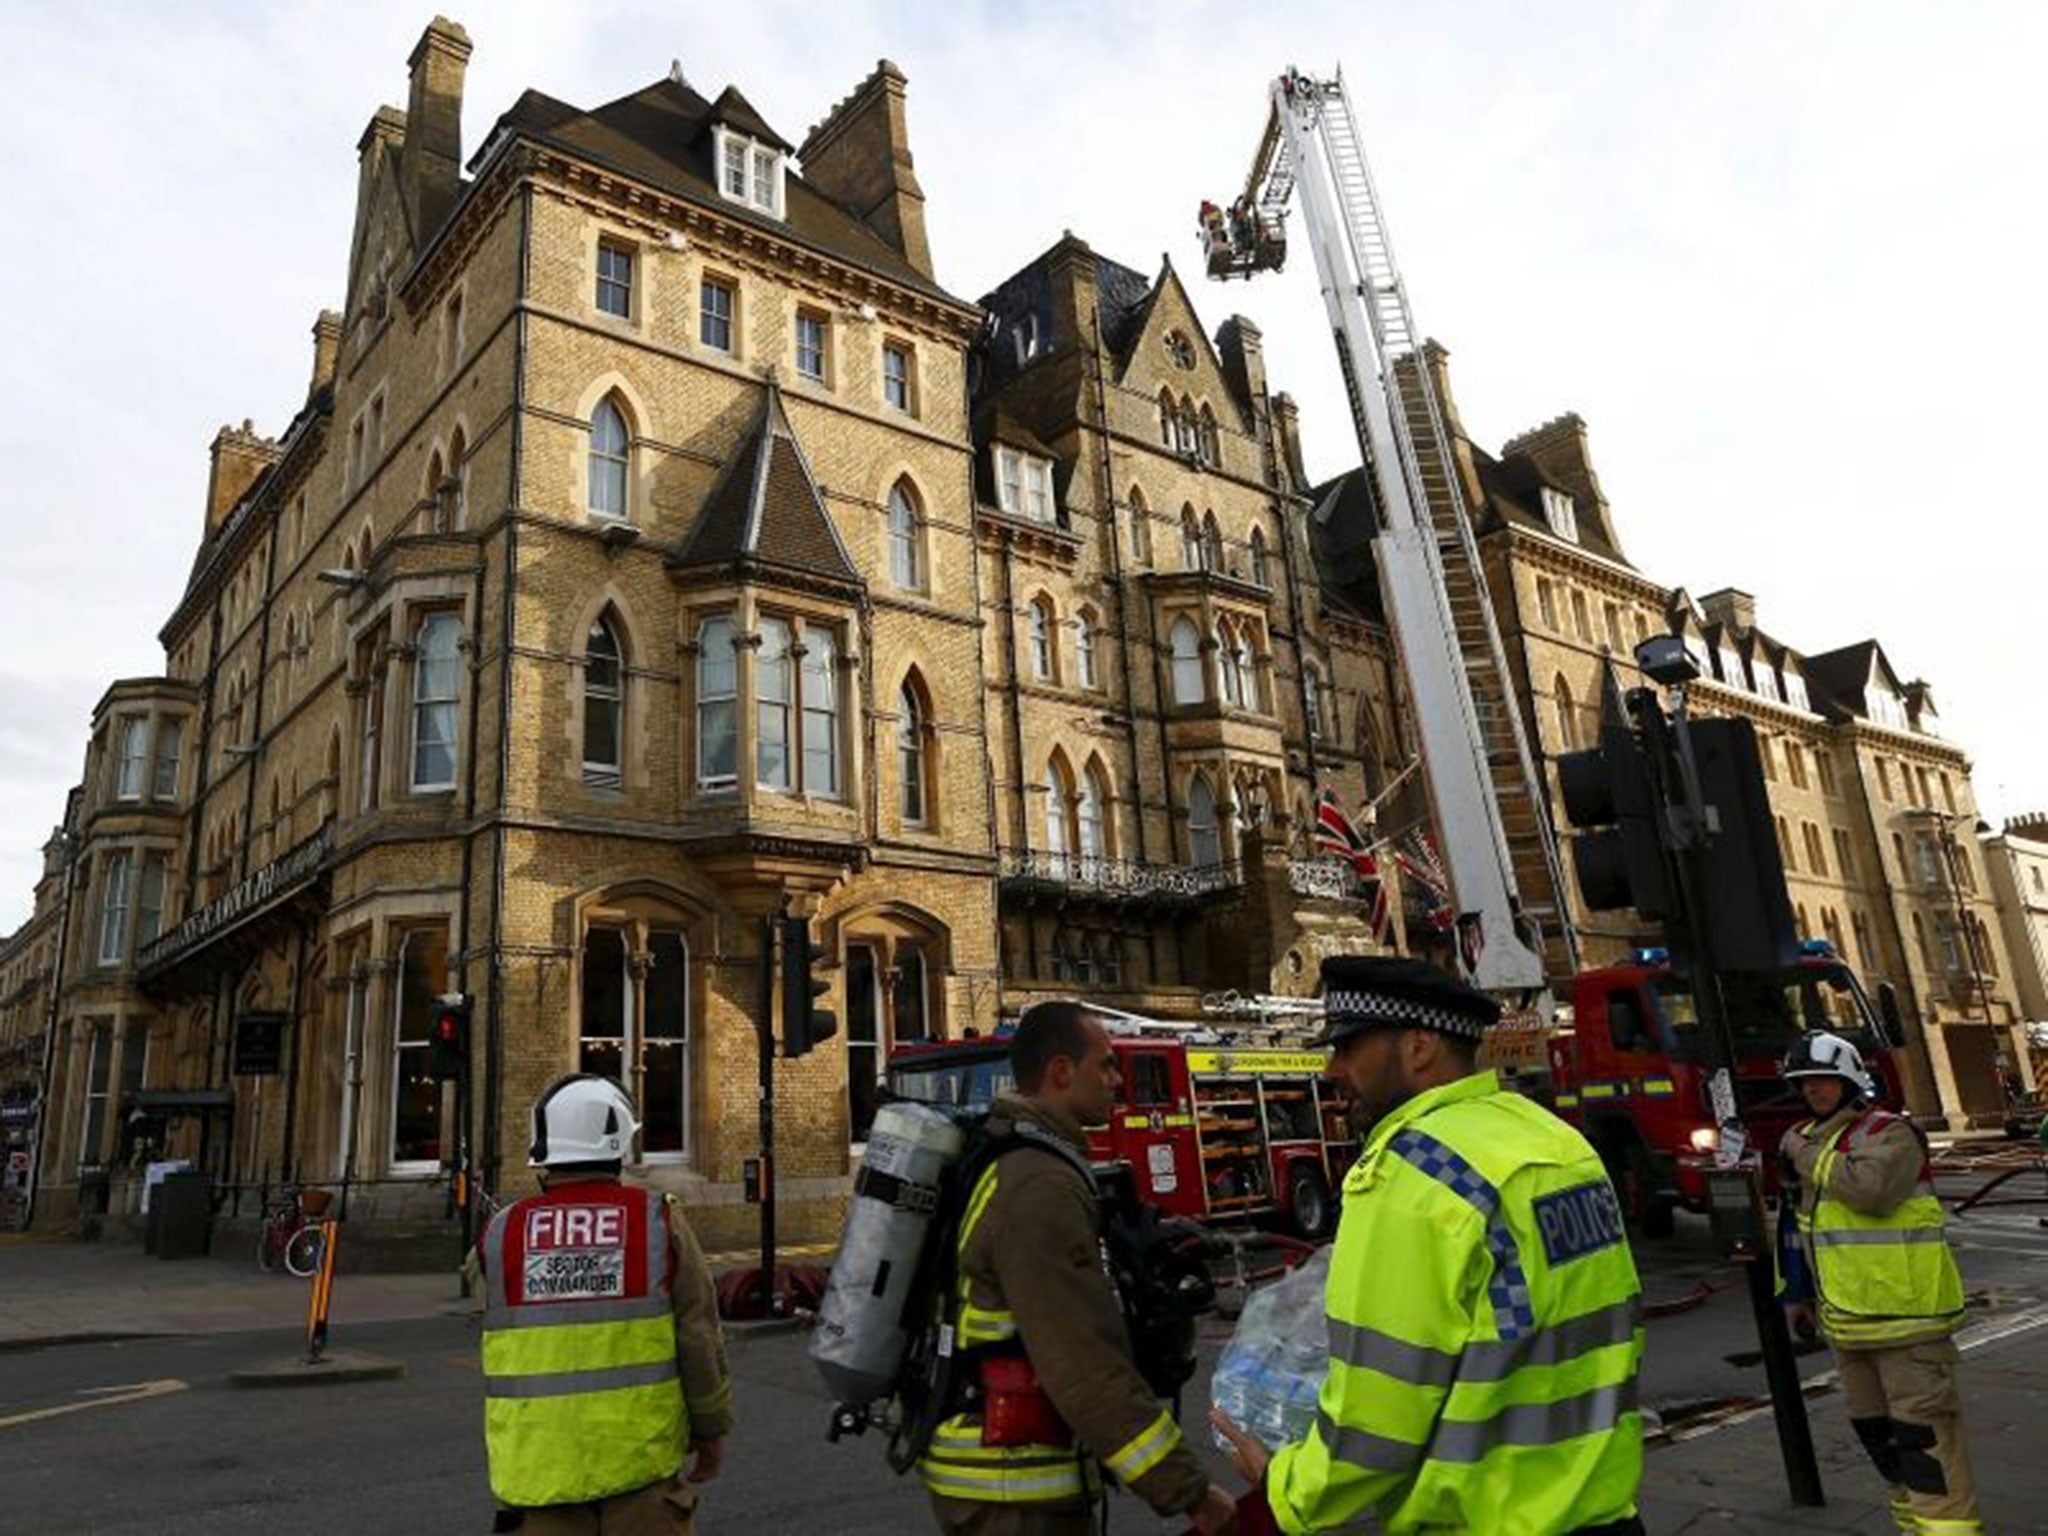 Firefighters attend a fire at the Randolph Hotel in Oxford on April 17